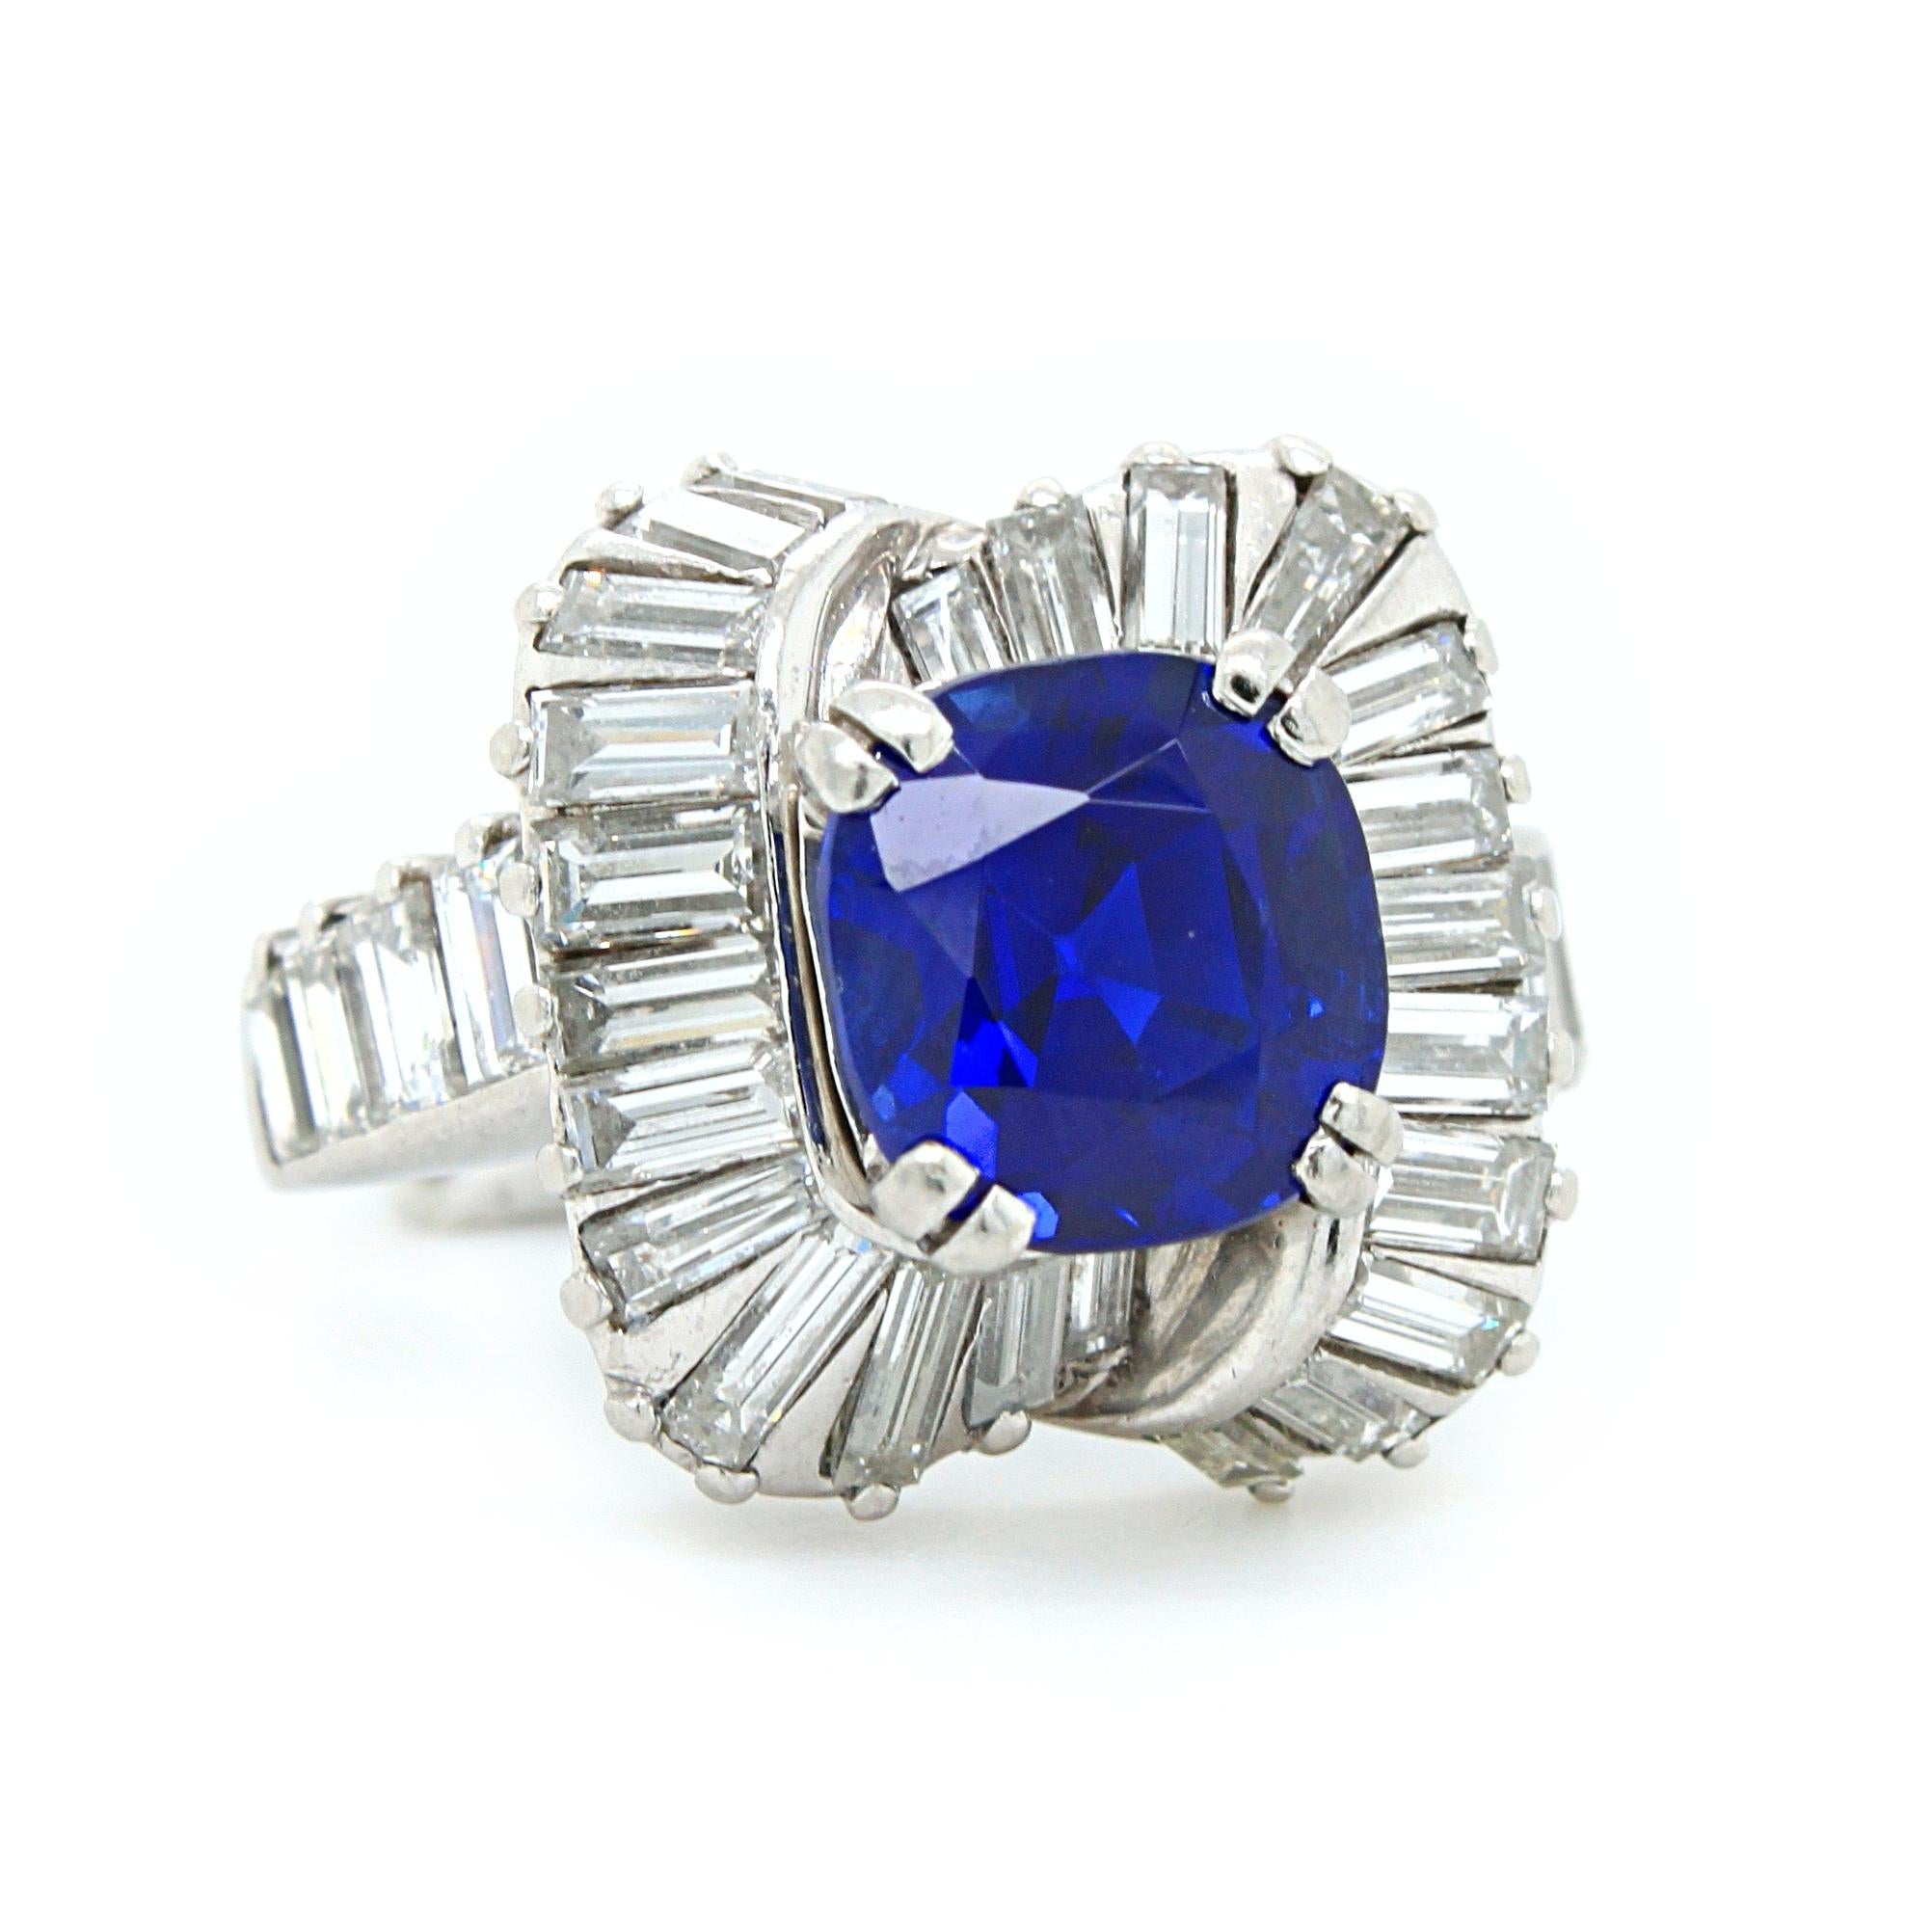 An exceptional Kashmir Sapphire and Diamond ring, by Mauboussin, ca. 1958. 

The centre sapphire is of Kashmir origin and unheated, weighing 3.19 carats. It is loup clean and a has a very strong and deep blue colour - also known as 'royal blue' by